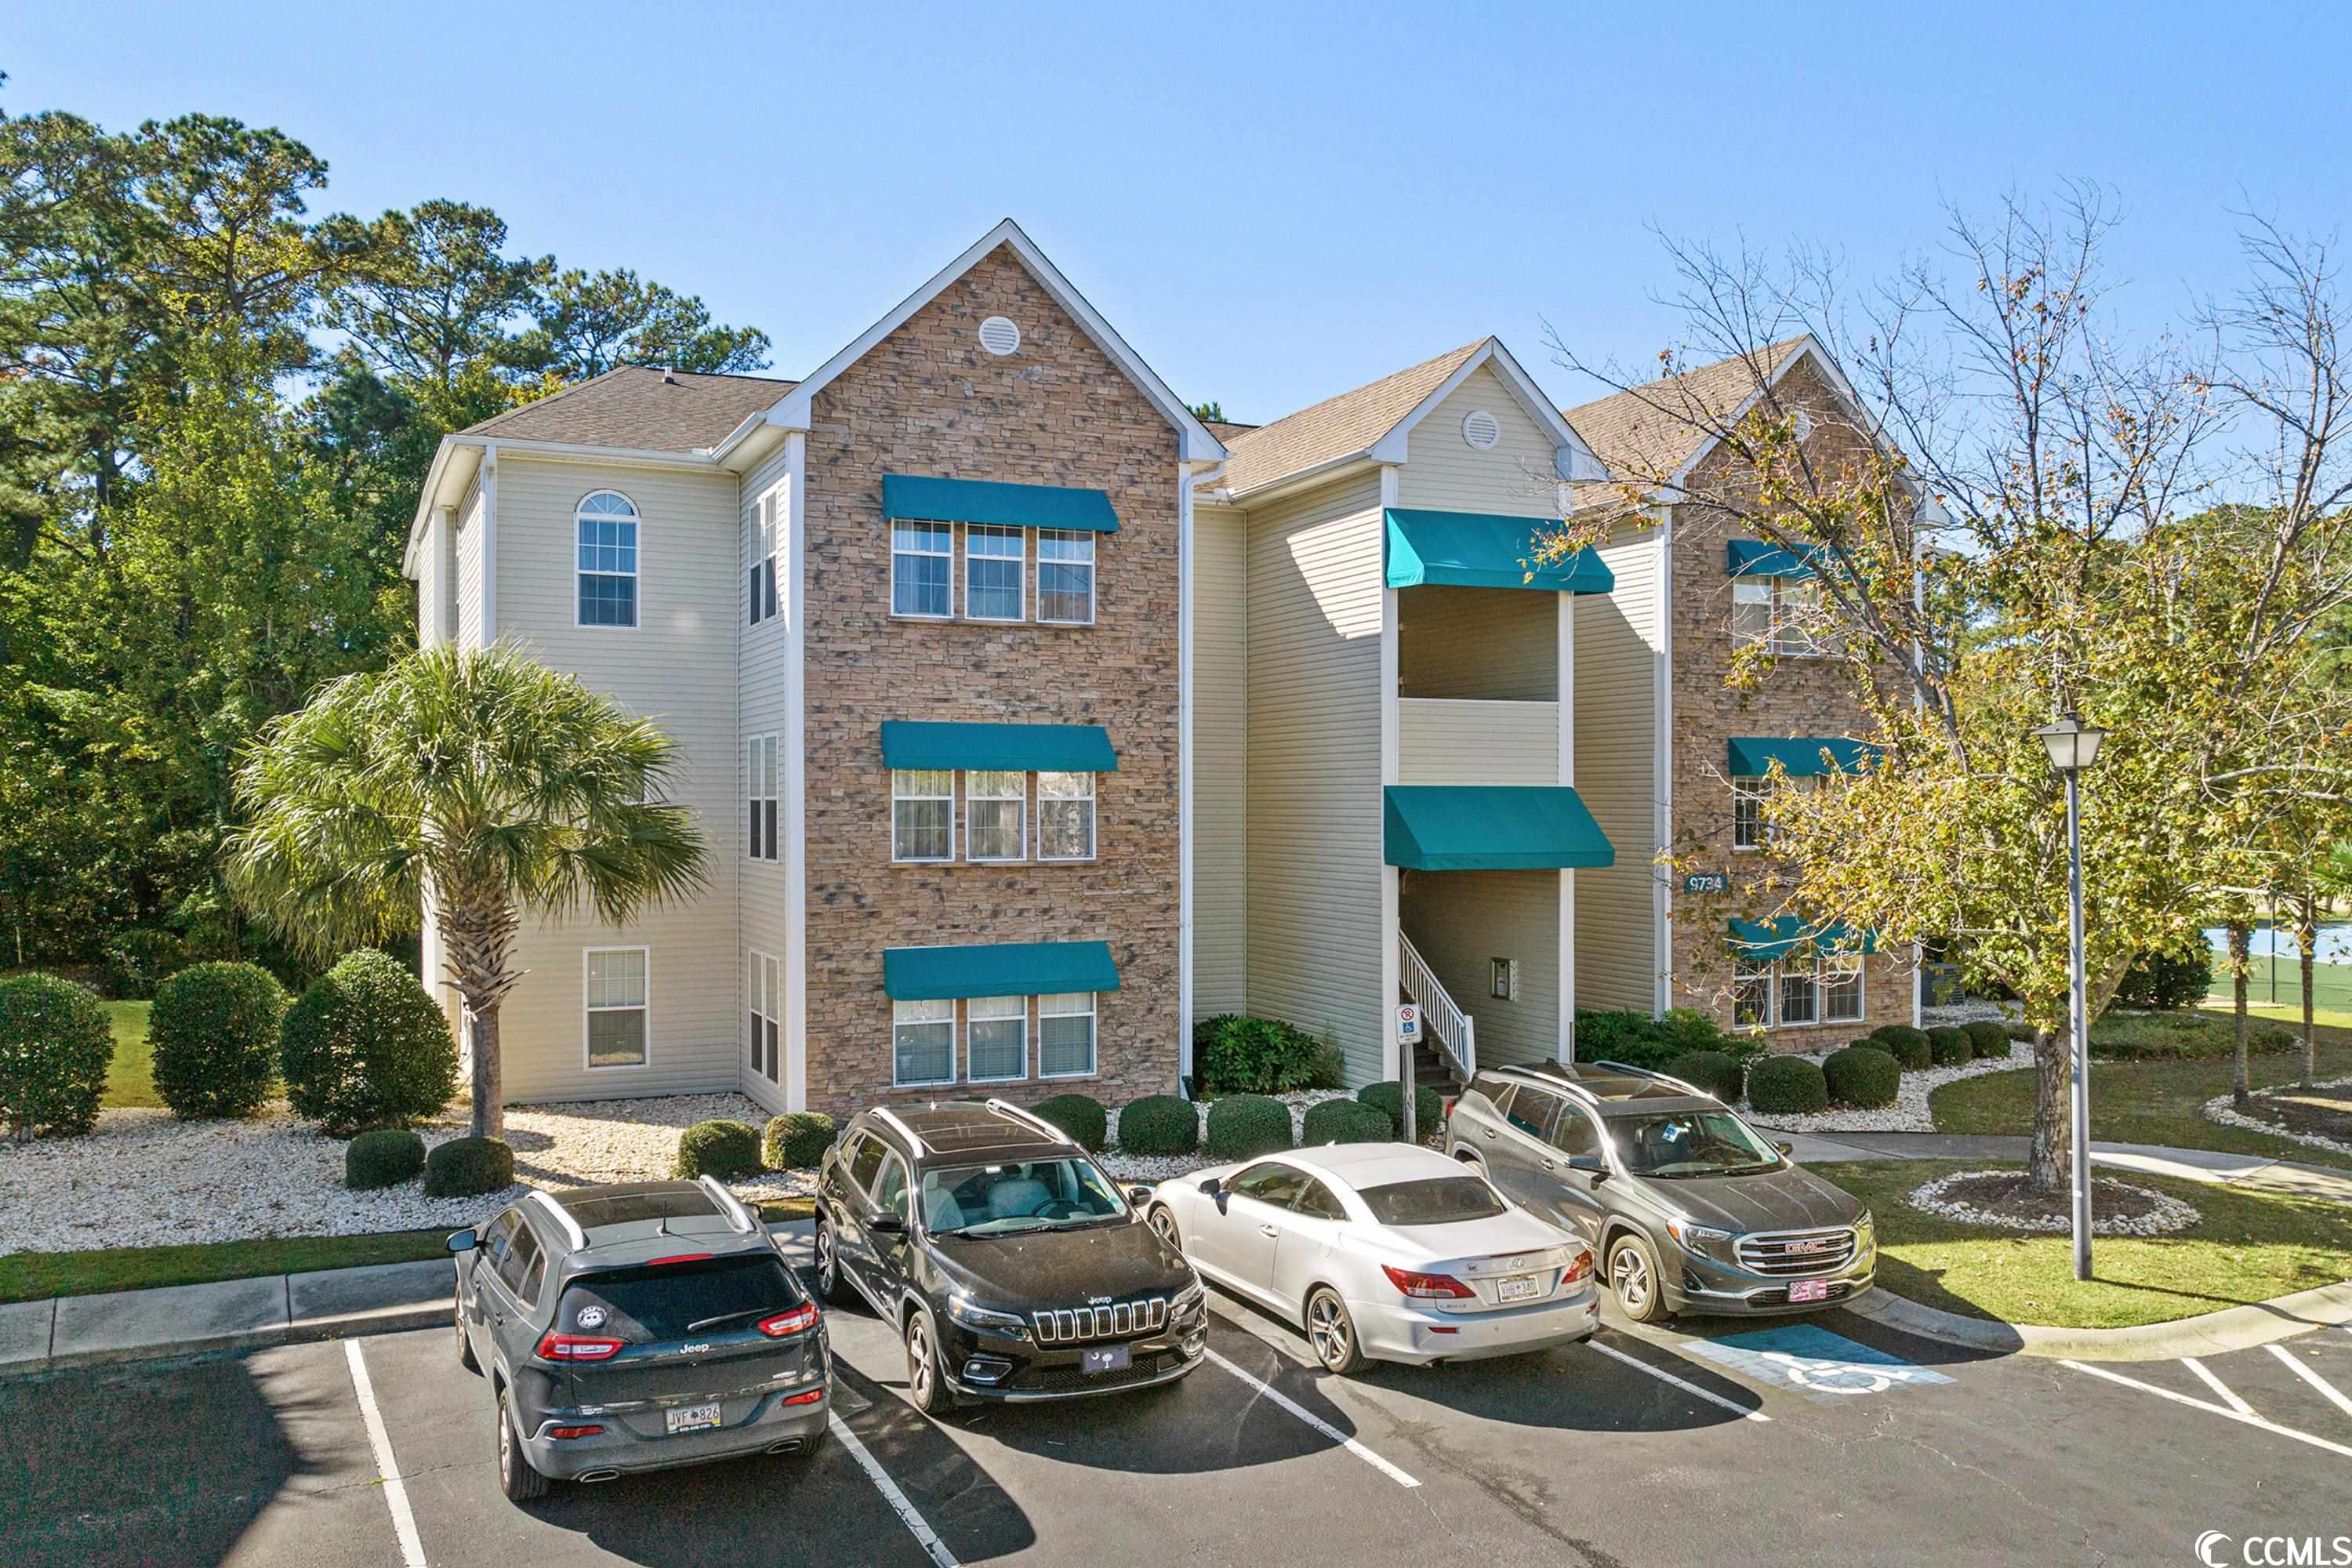 welcome to this fully furnished 2 bedroom, 1 bath condo in the savannah shores development, arcadian shores' beach section. great location, just a walk or golf cart ride to the beach. enjoy granite countertops and stainless steel appliances in the kitchen, complete with a pantry. the living room features a vaulted ceiling, fireplace, and wet bar. the master bedroom offers a king-sized bed and walk-in closet, with a bathroom accessible from both the bedroom and living room. the second bedroom has a bunk bed with a twin trundle and a walk-in closet.  added conveniences include in-unit laundry with a washer and dryer and has been freshly painted. savannah shores offers resort-style amenities: outdoor pool, tennis and pickleball courts, volleyball, putting green, fitness center, and more. short-term rentals are allowed, making it an ideal primary, secondary, or investment property. don't miss out on the beach lifestyle at savannah shores!